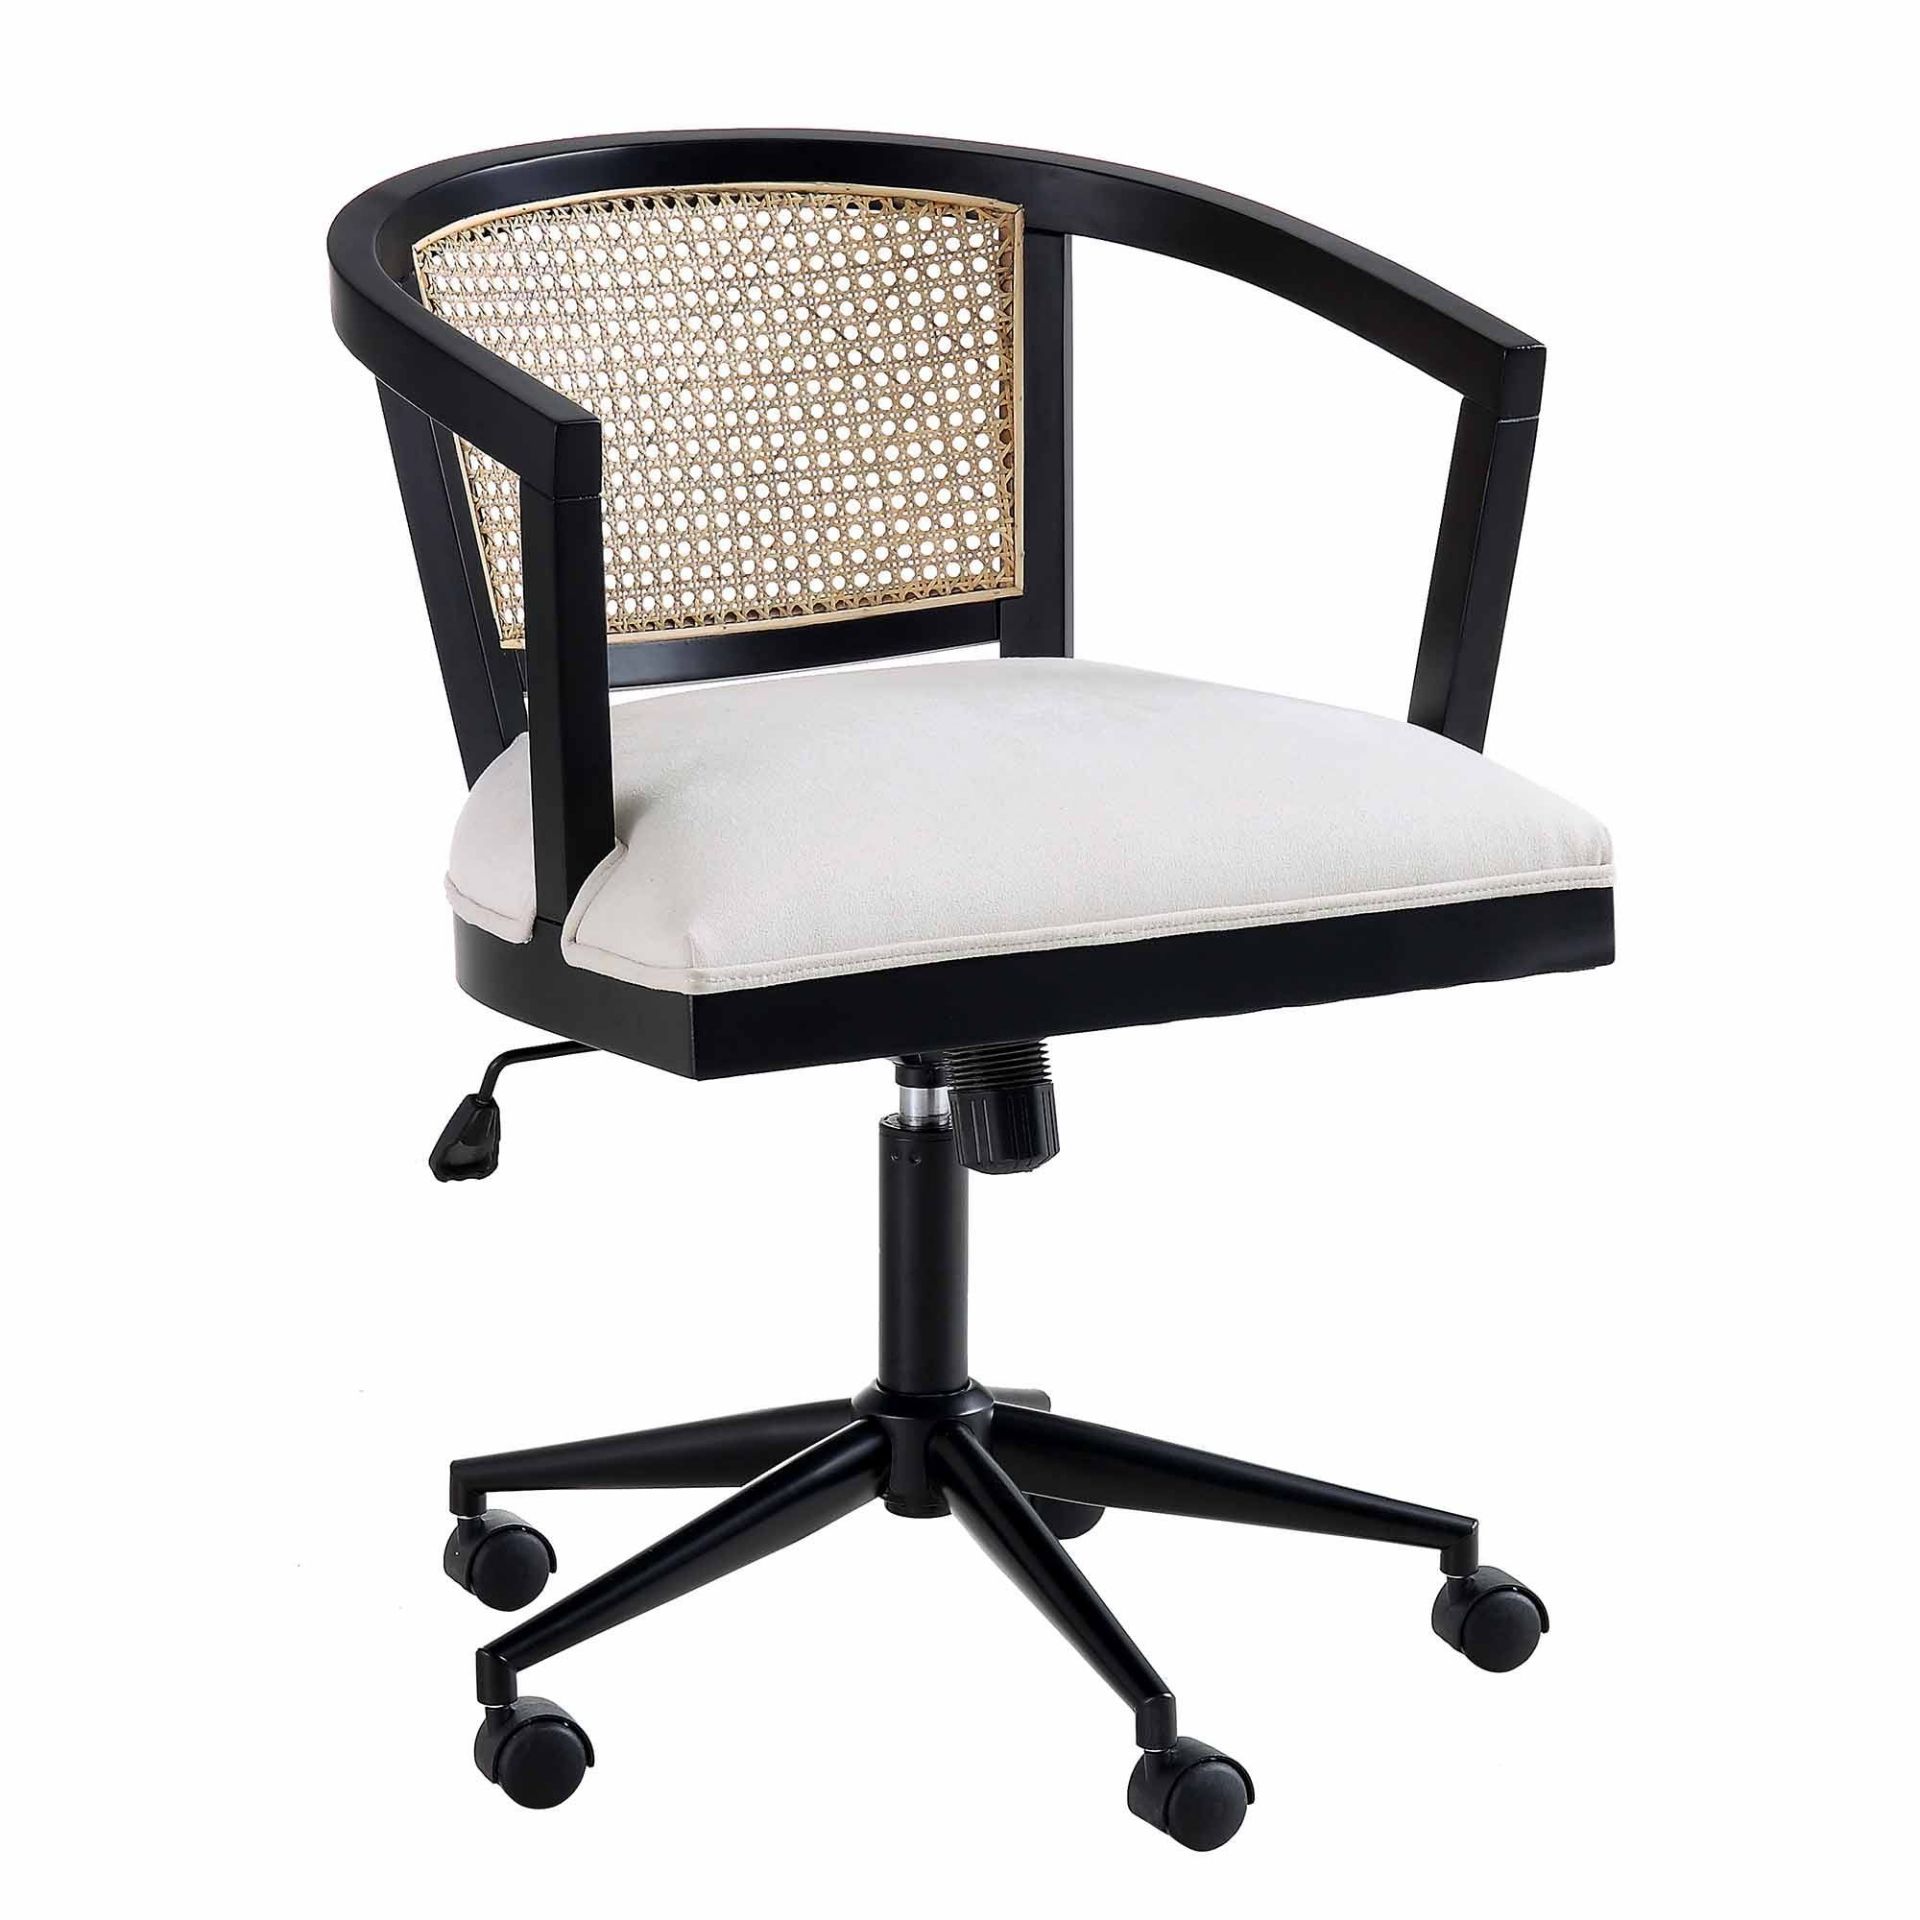 Lucia Natural Cane Swivel Desk Chair. - ER30. RRP £249.99. The chair frame is crafted from solid - Image 2 of 2